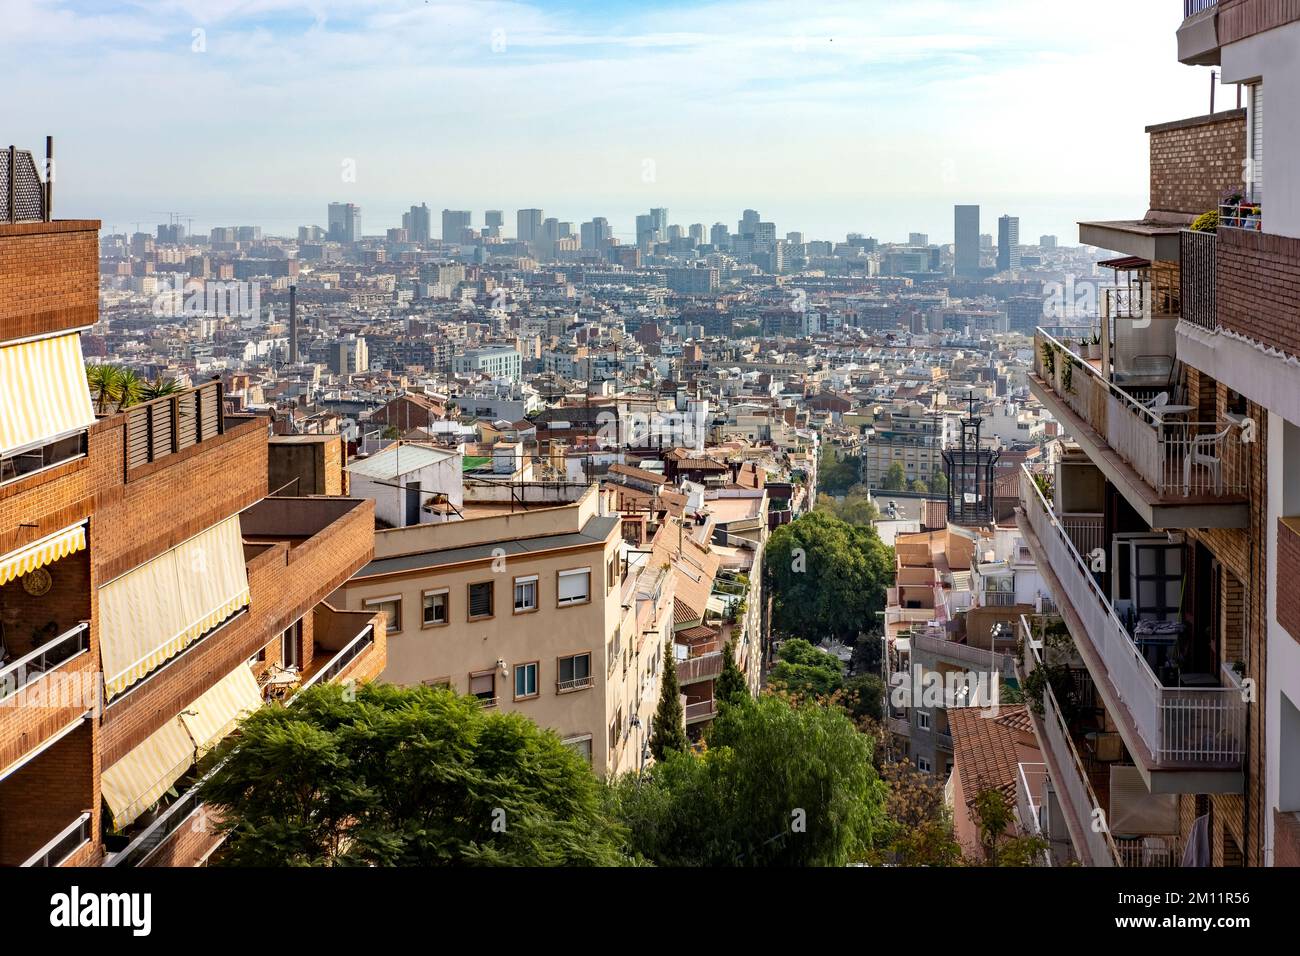 Aerial view of the city of Barcelona from a residential area and in the background modern office buildings Stock Photo